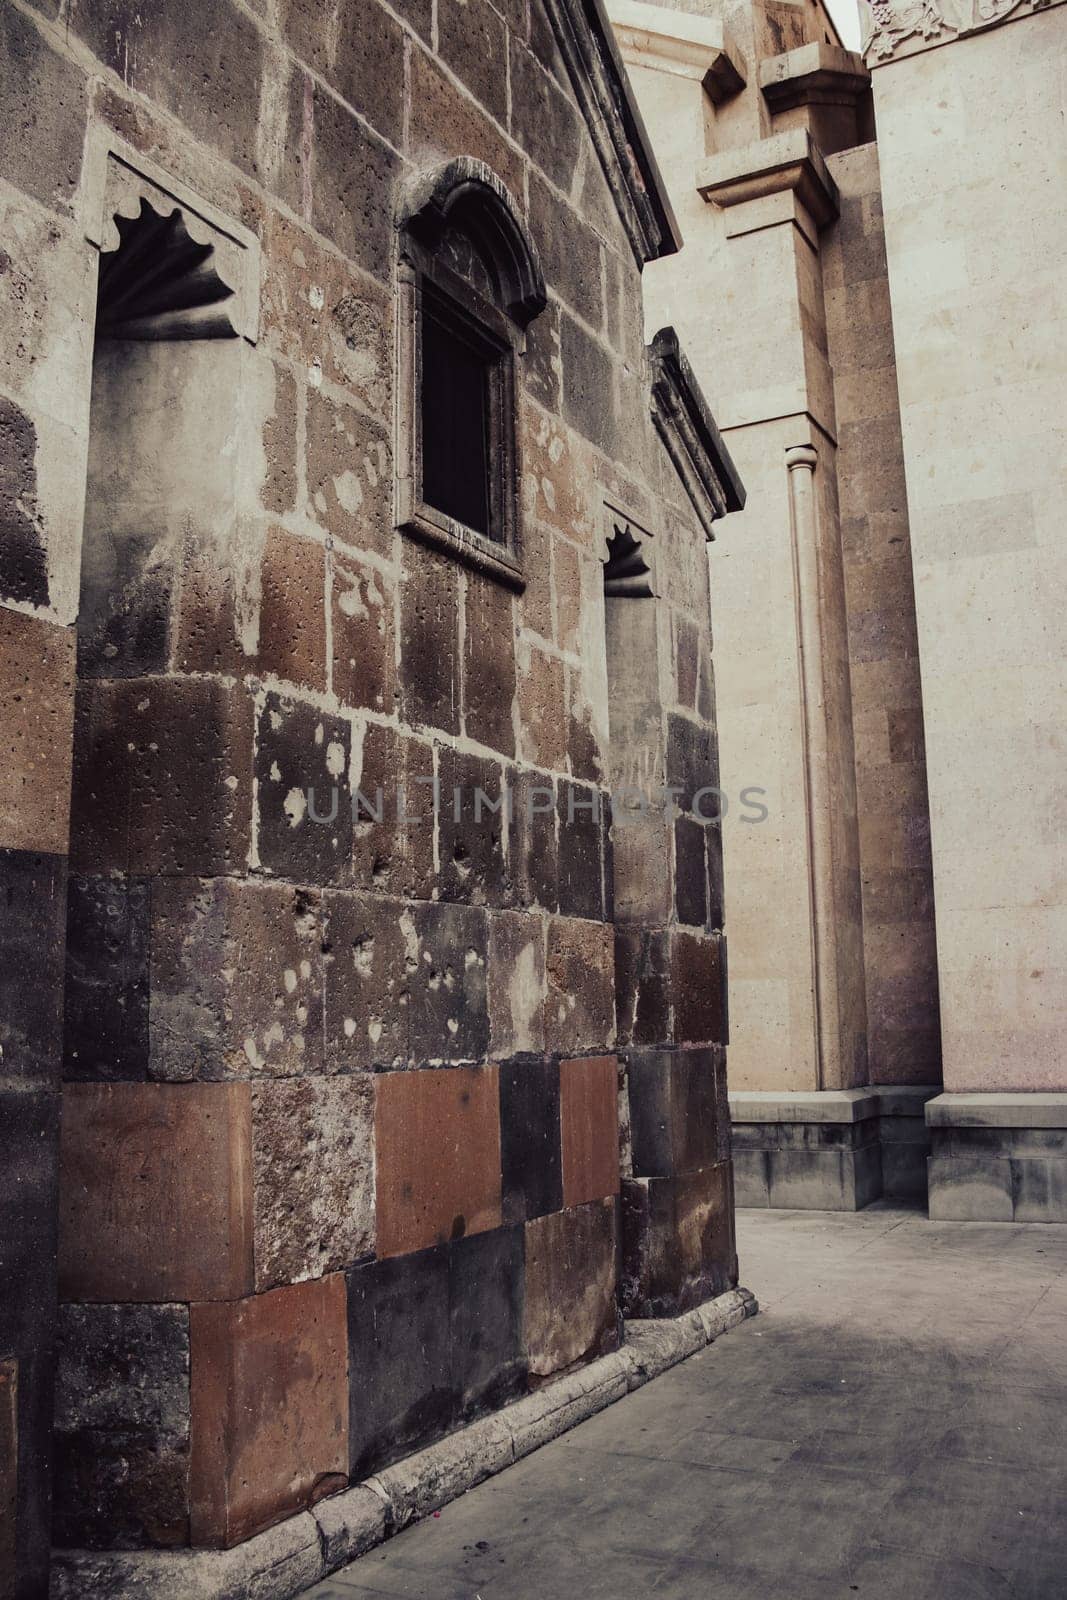 Ancient church walls with windows cityscape concept photo. Street scene of Yerevan city. High quality picture for wallpaper